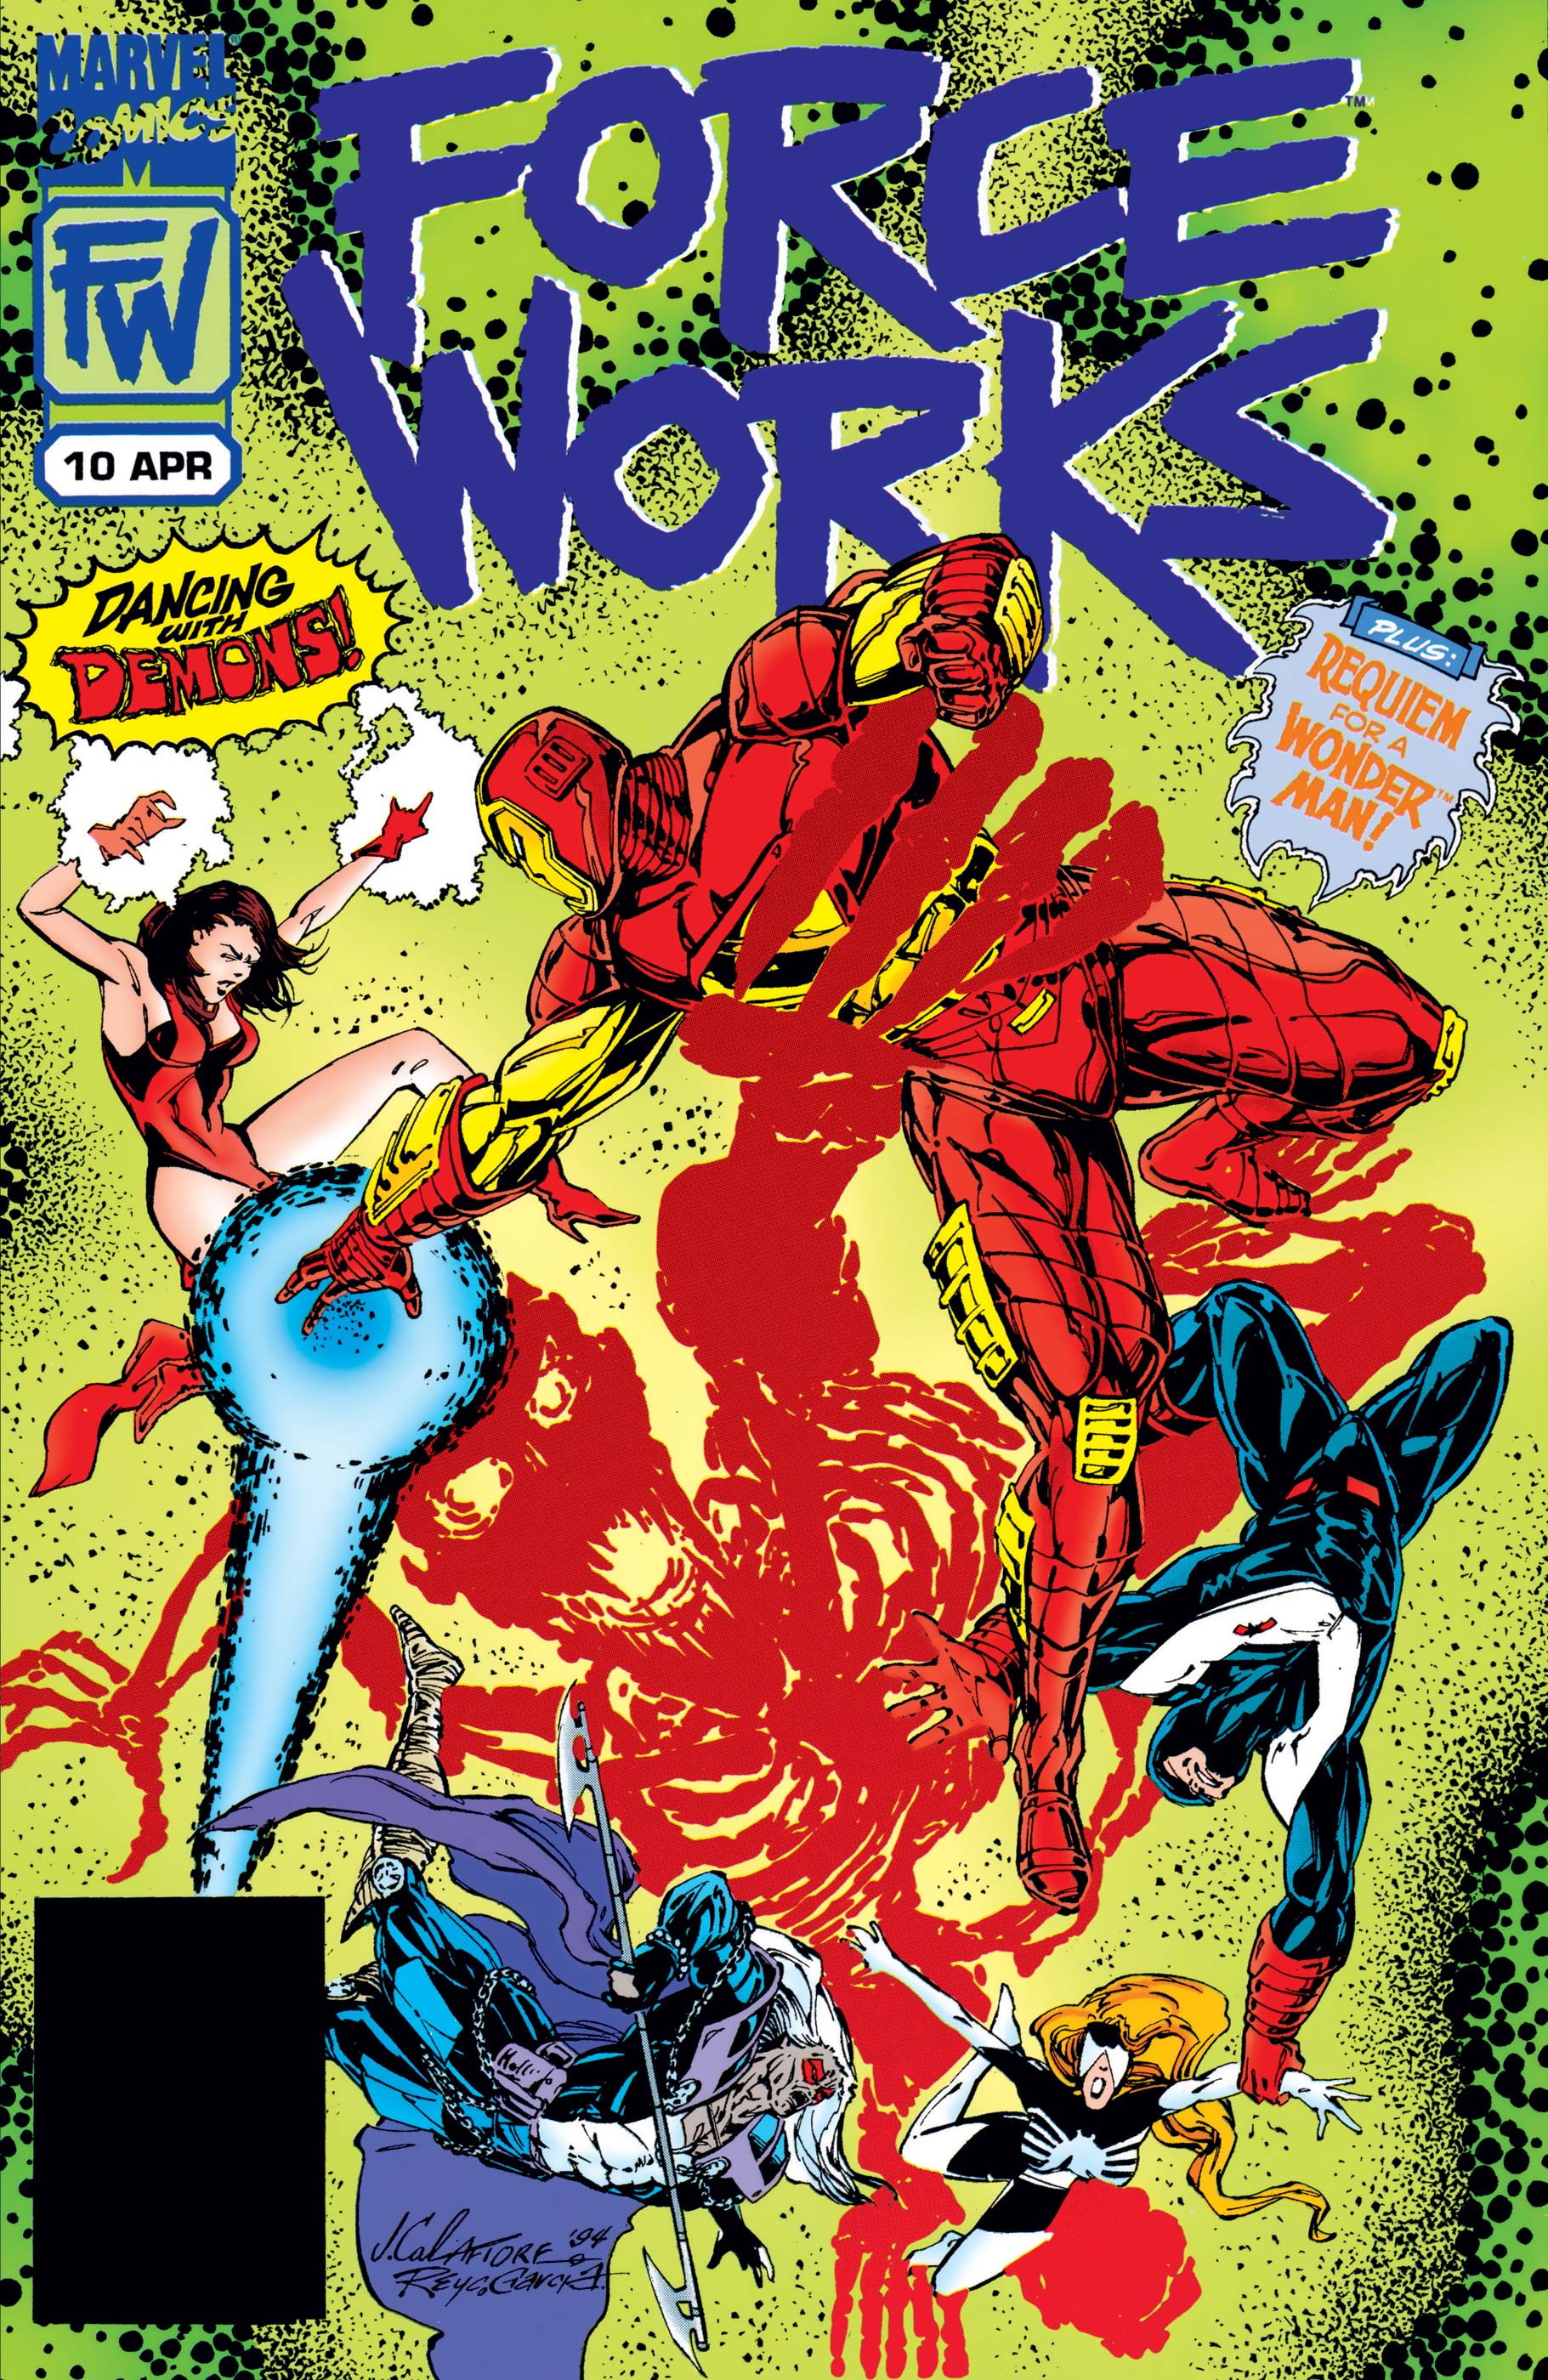 Force Works (1994) #10